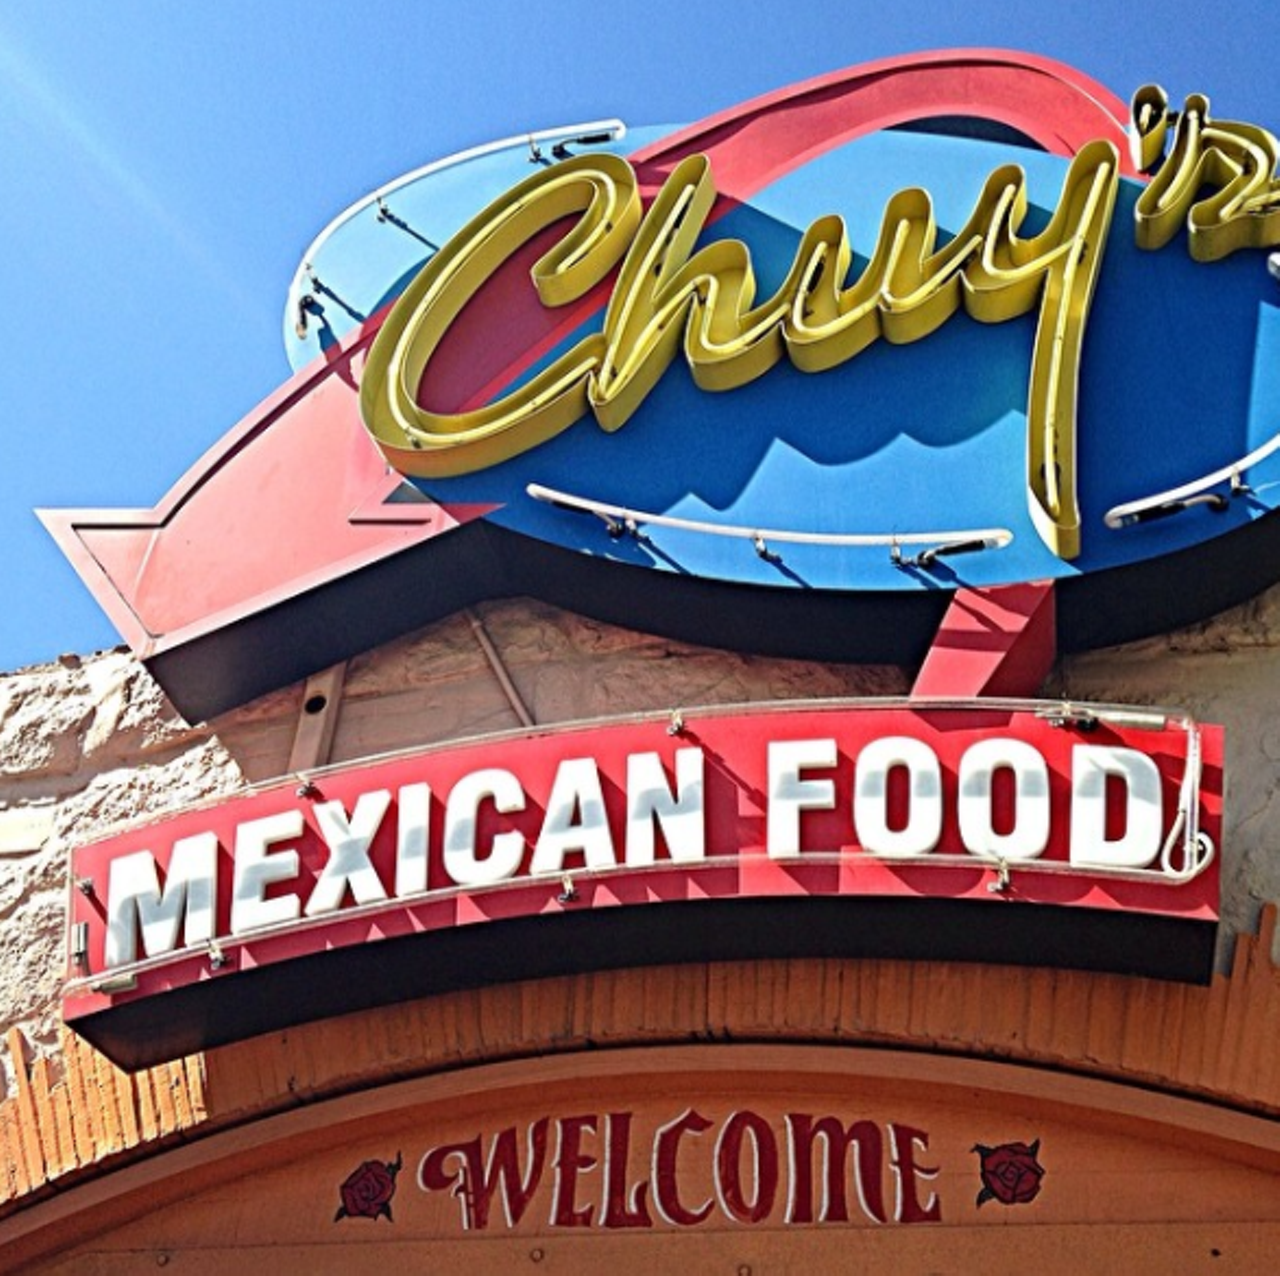 Chuy's
Multiple locations,  chuys.com
Choose between bean and cheese nachos, Special Nachos with pico and guac or Panchos, which combines Special Nachos with choice of ground sirloin, beef fajita and chicken fajita. 
Photo via Instagram,  
terrymichaels